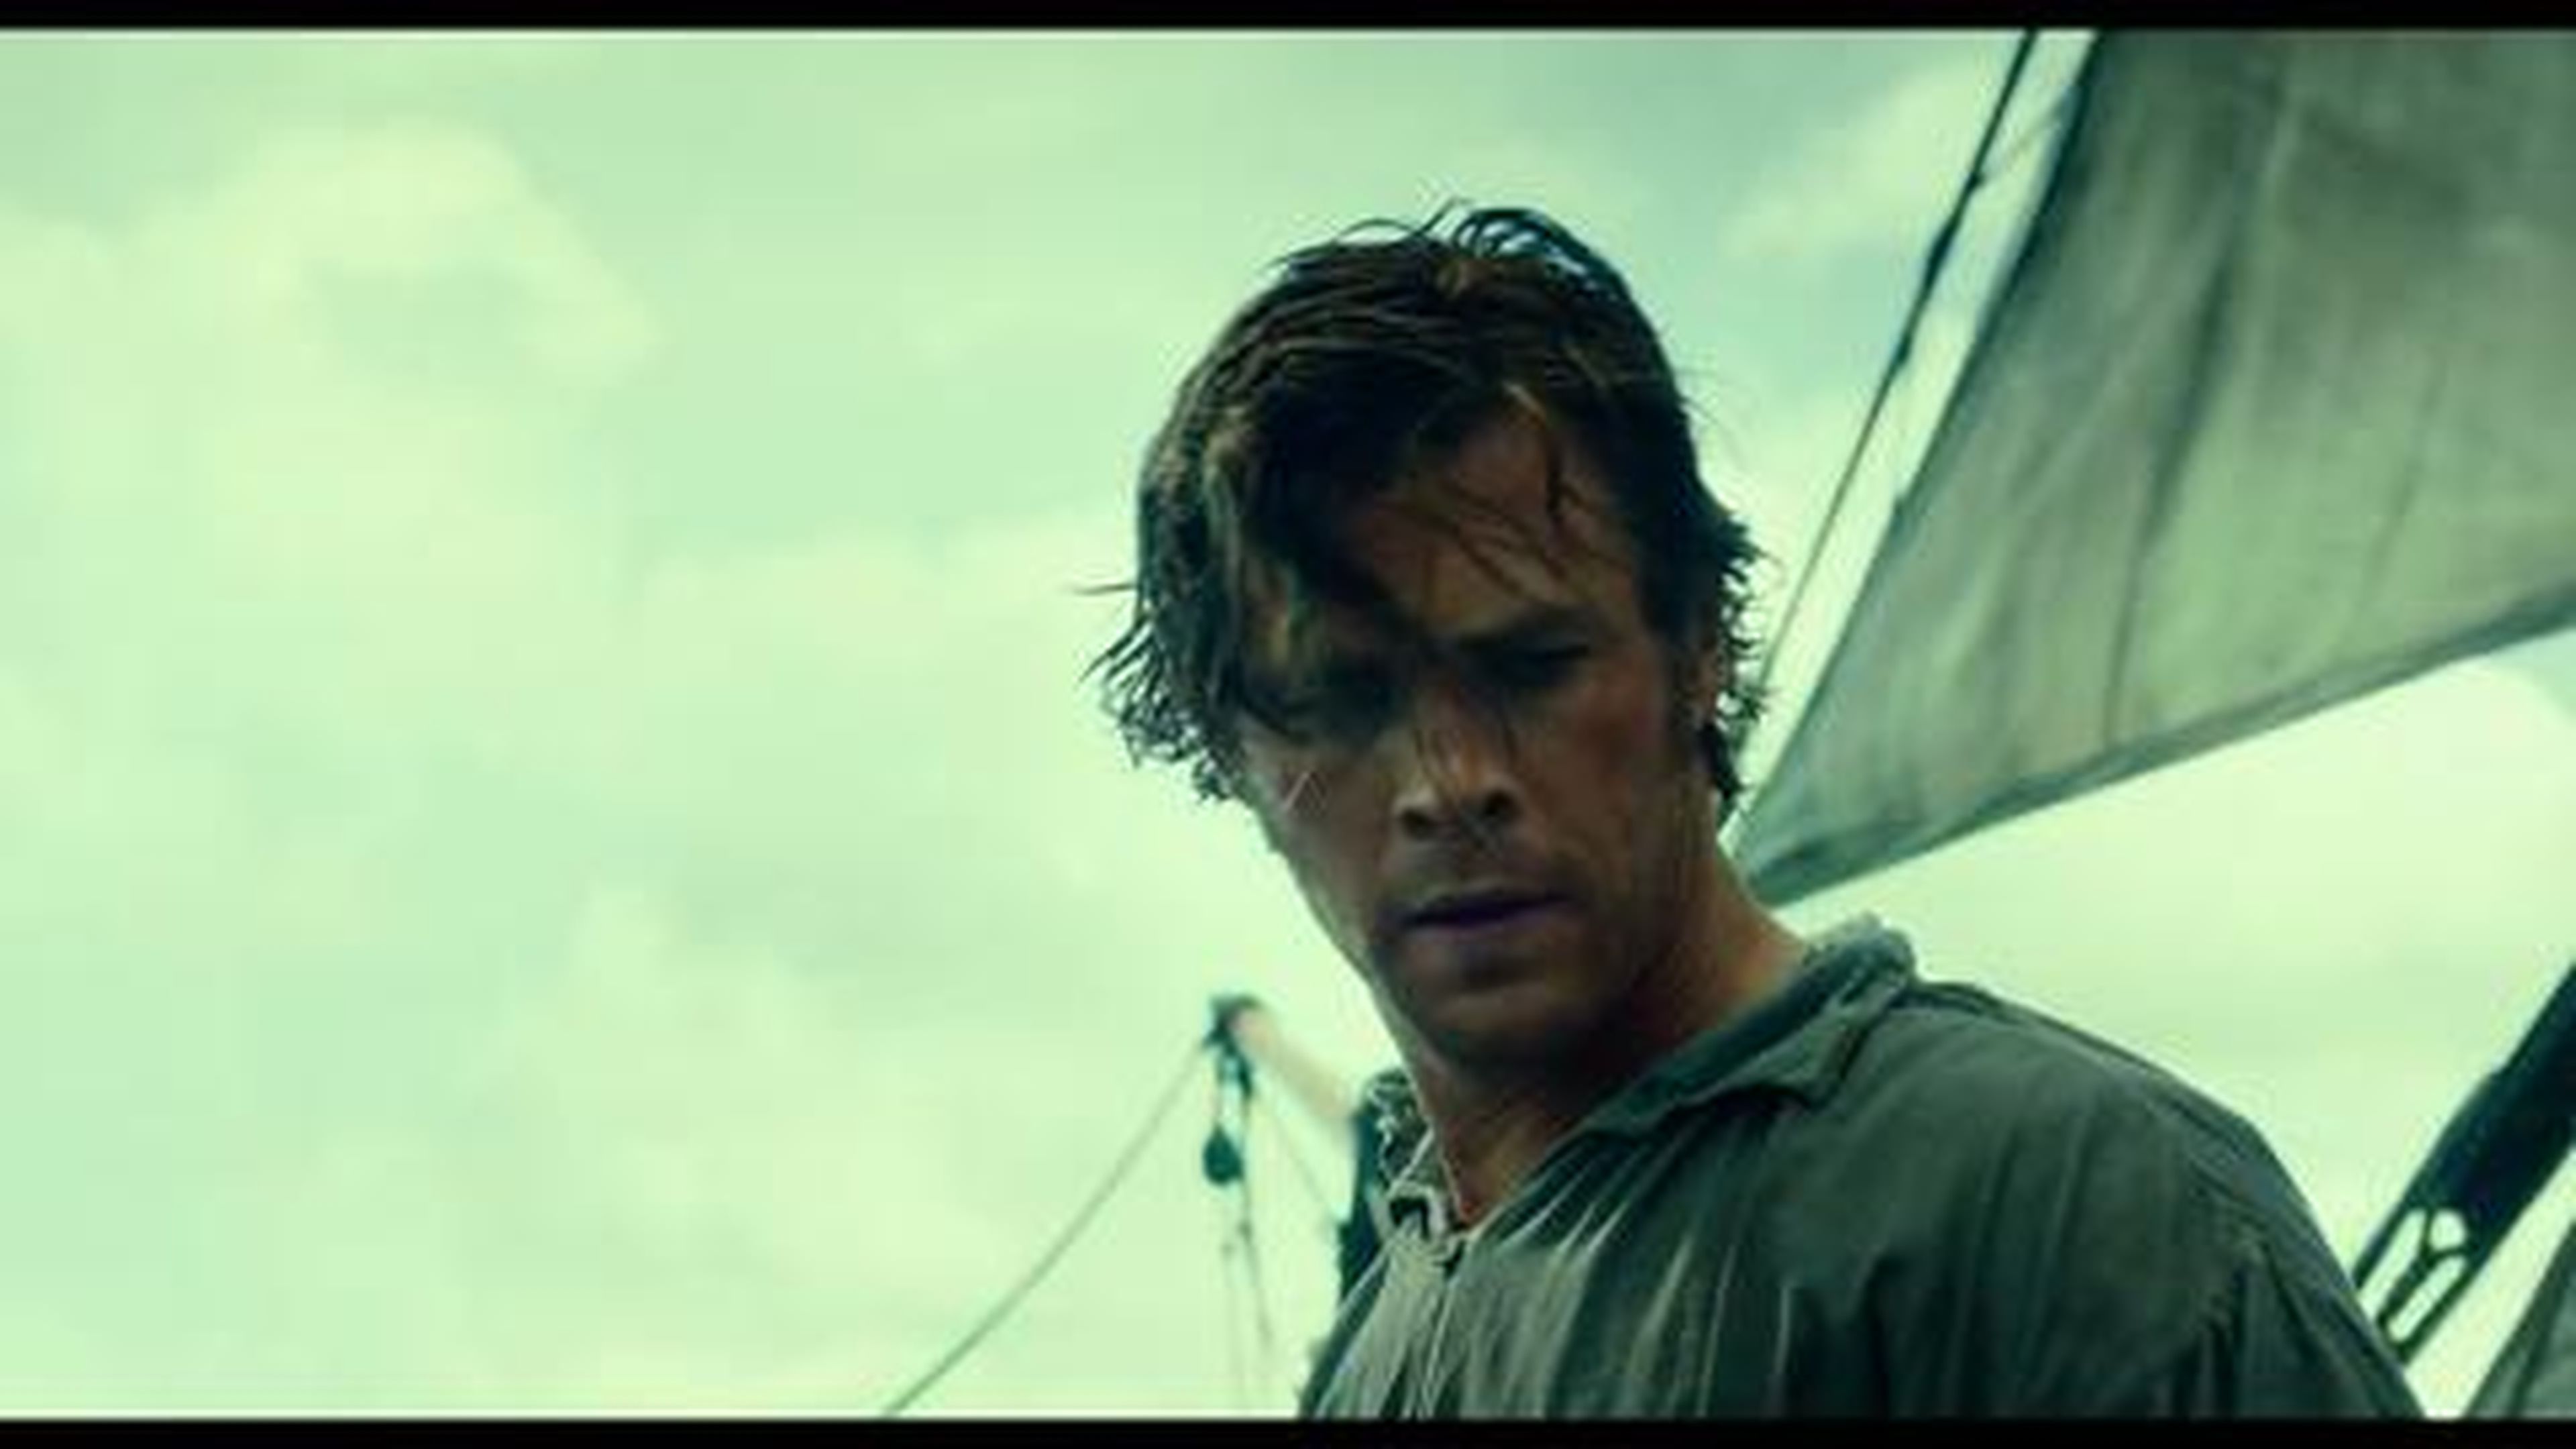 In the Heart of the Sea - Official Teaser Trailer [HD]